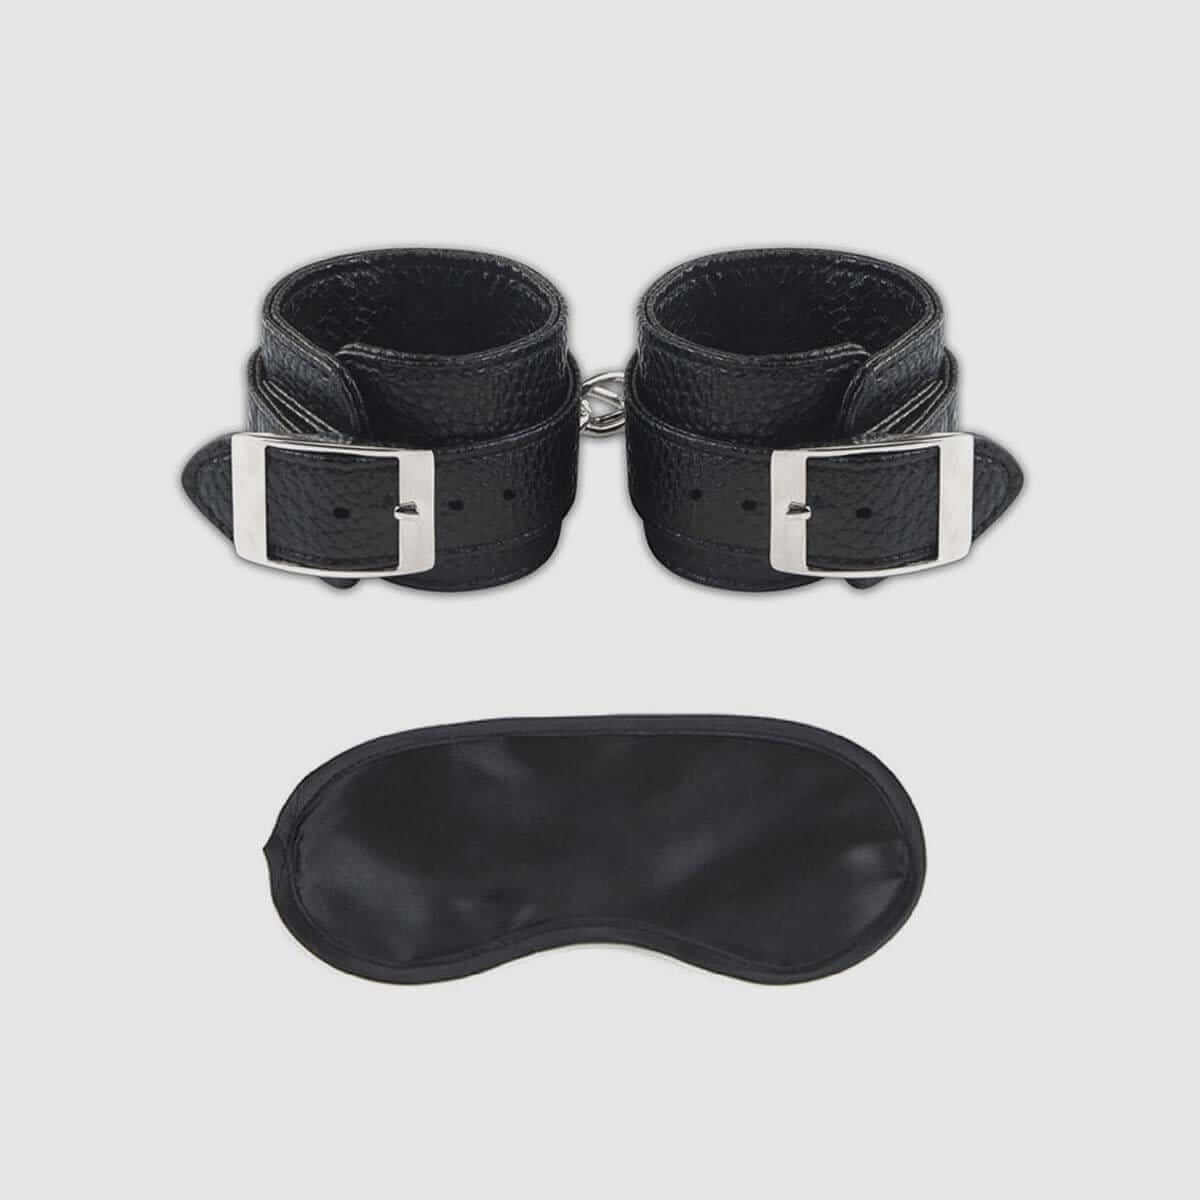 Lux Fetish Unisex Leatherette Cuffs - Black - Thorn & Feather Sex Toy Canada